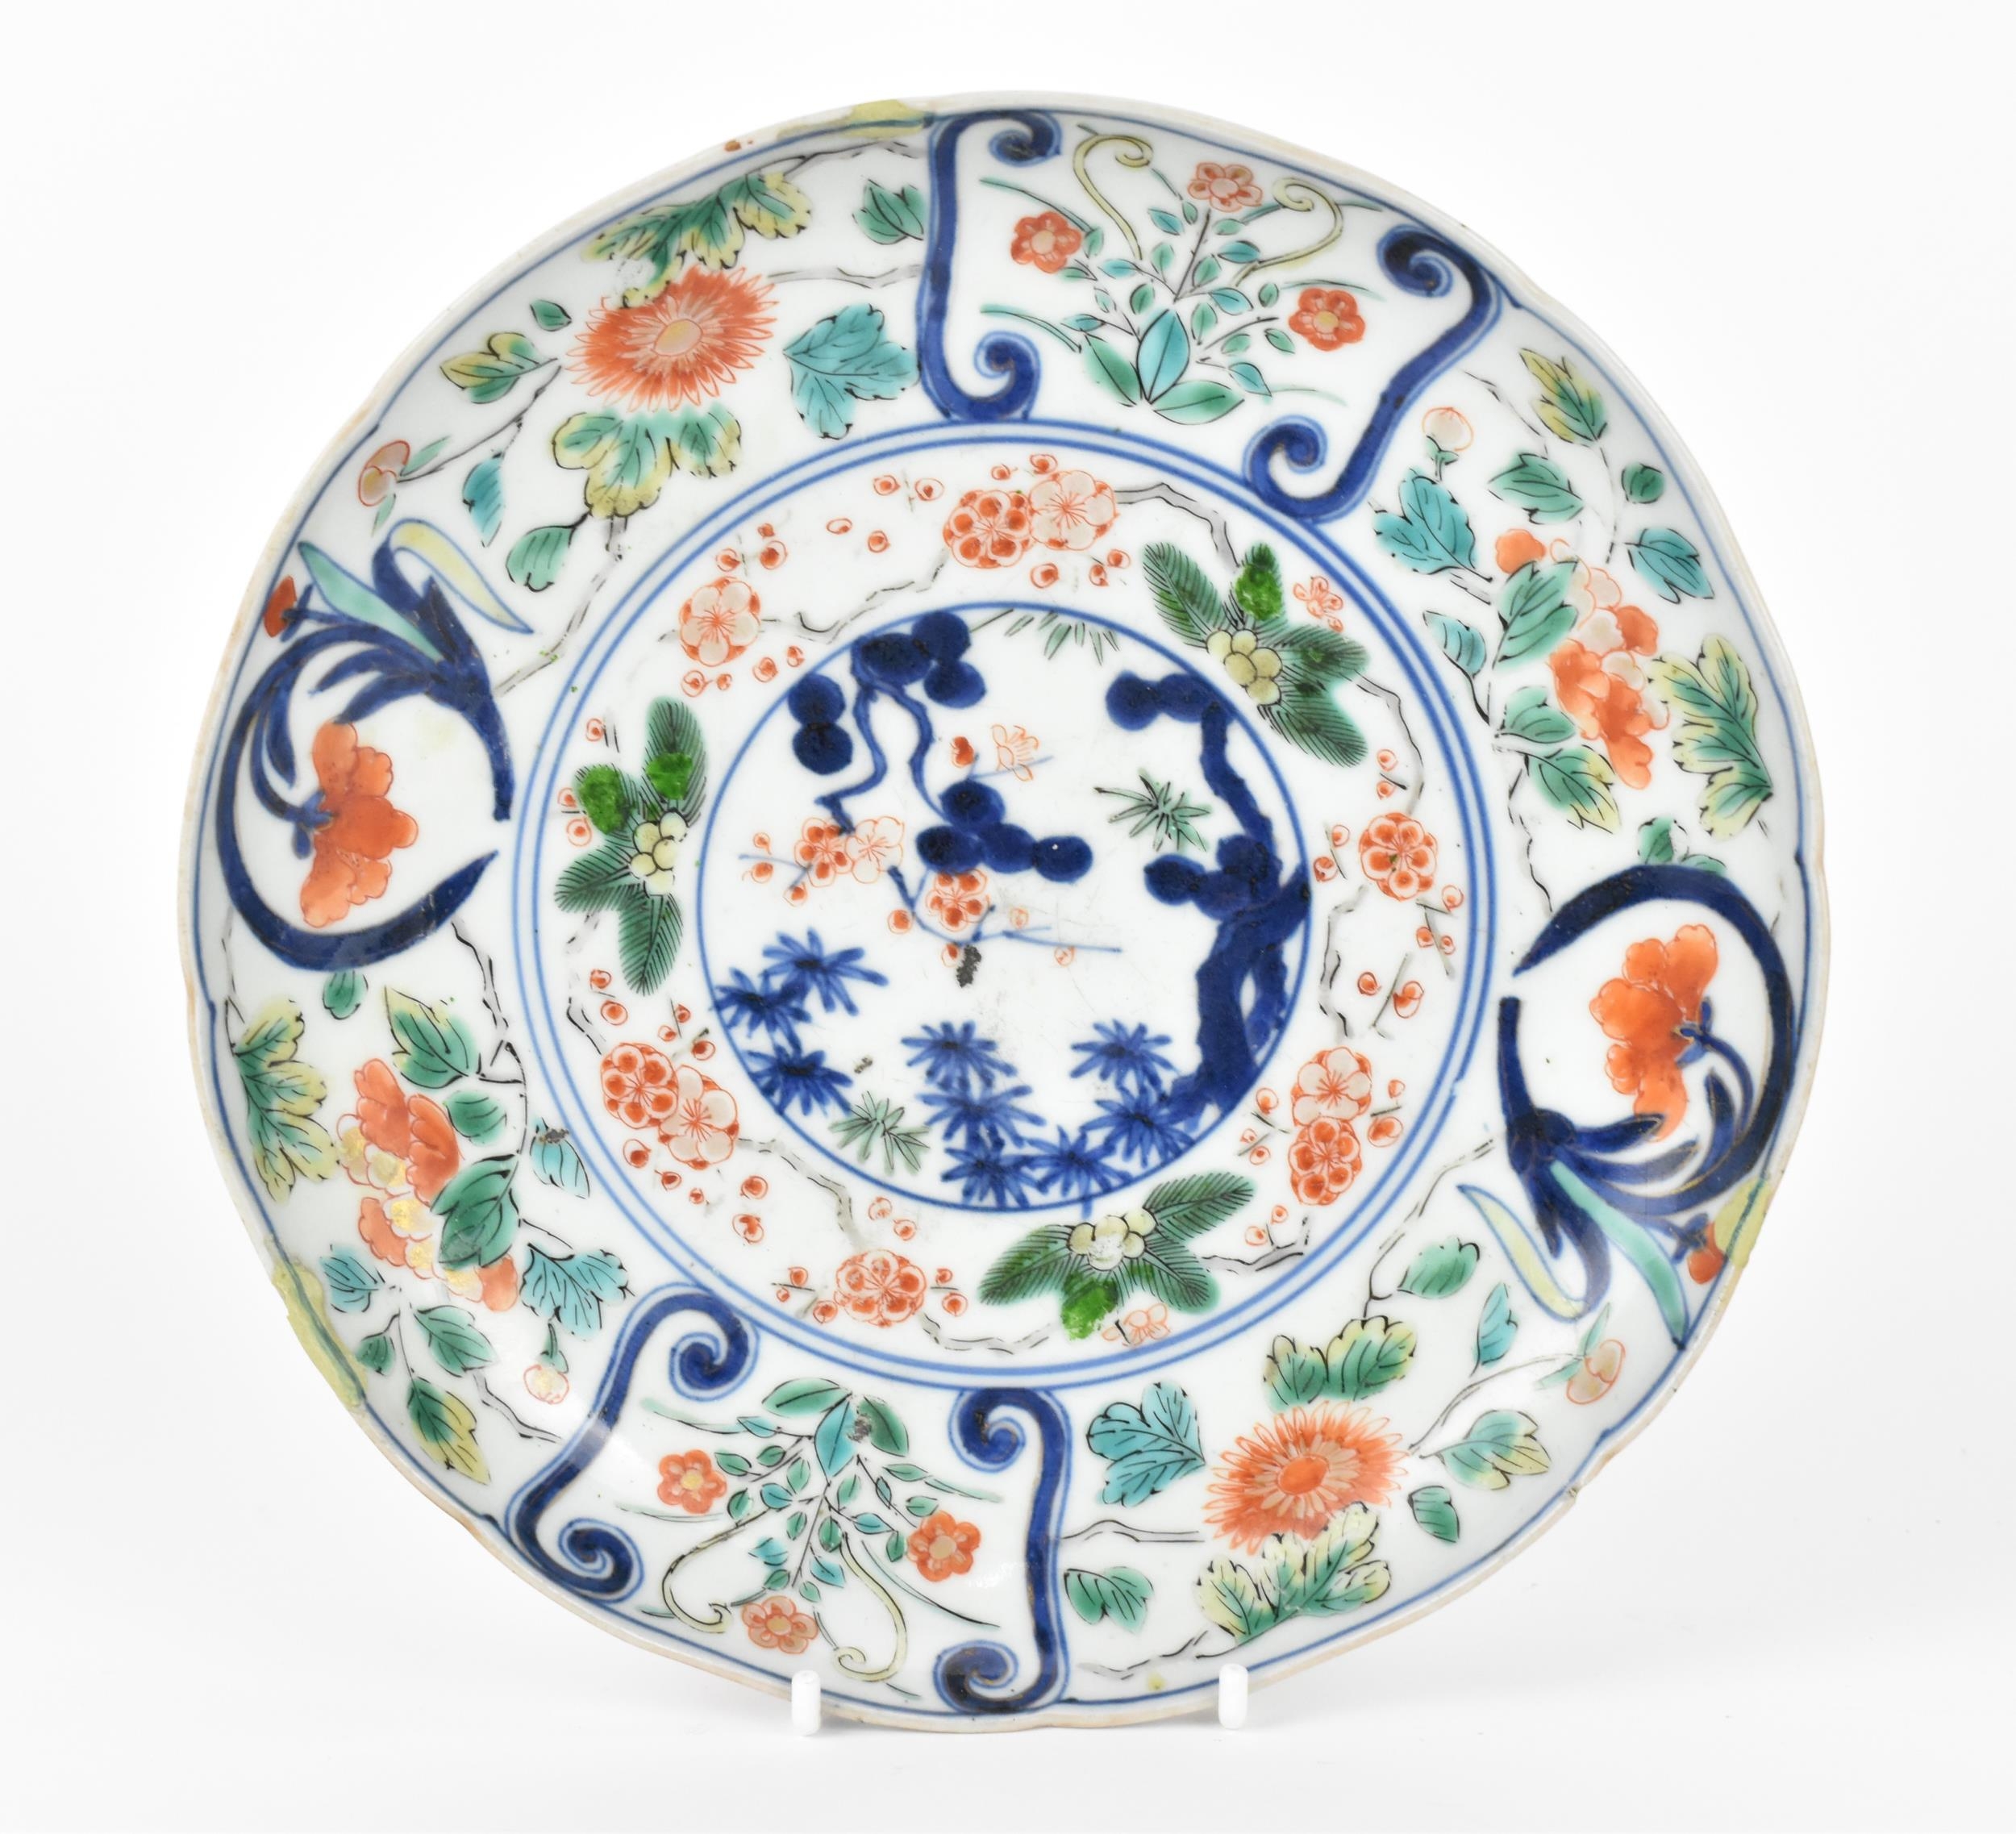 A Chinese Qing dynasty Famille Verte porcelain dish, 18th century, of circular lobbed form with